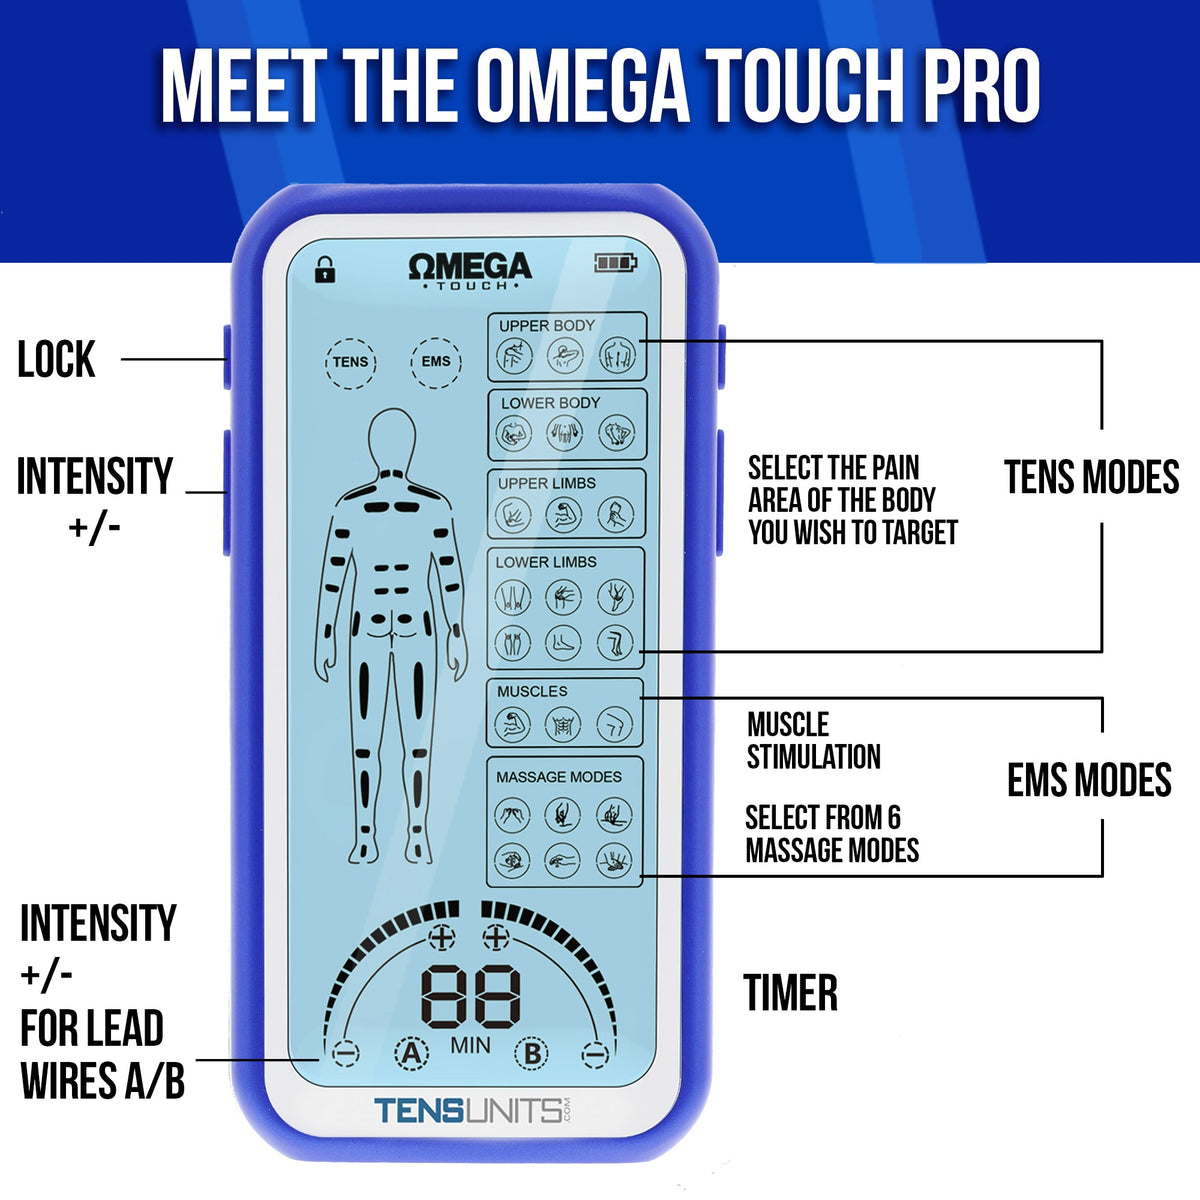 Omega Professional Tens & NMES/EMS Combo Unit for Ultimate Pain Relief